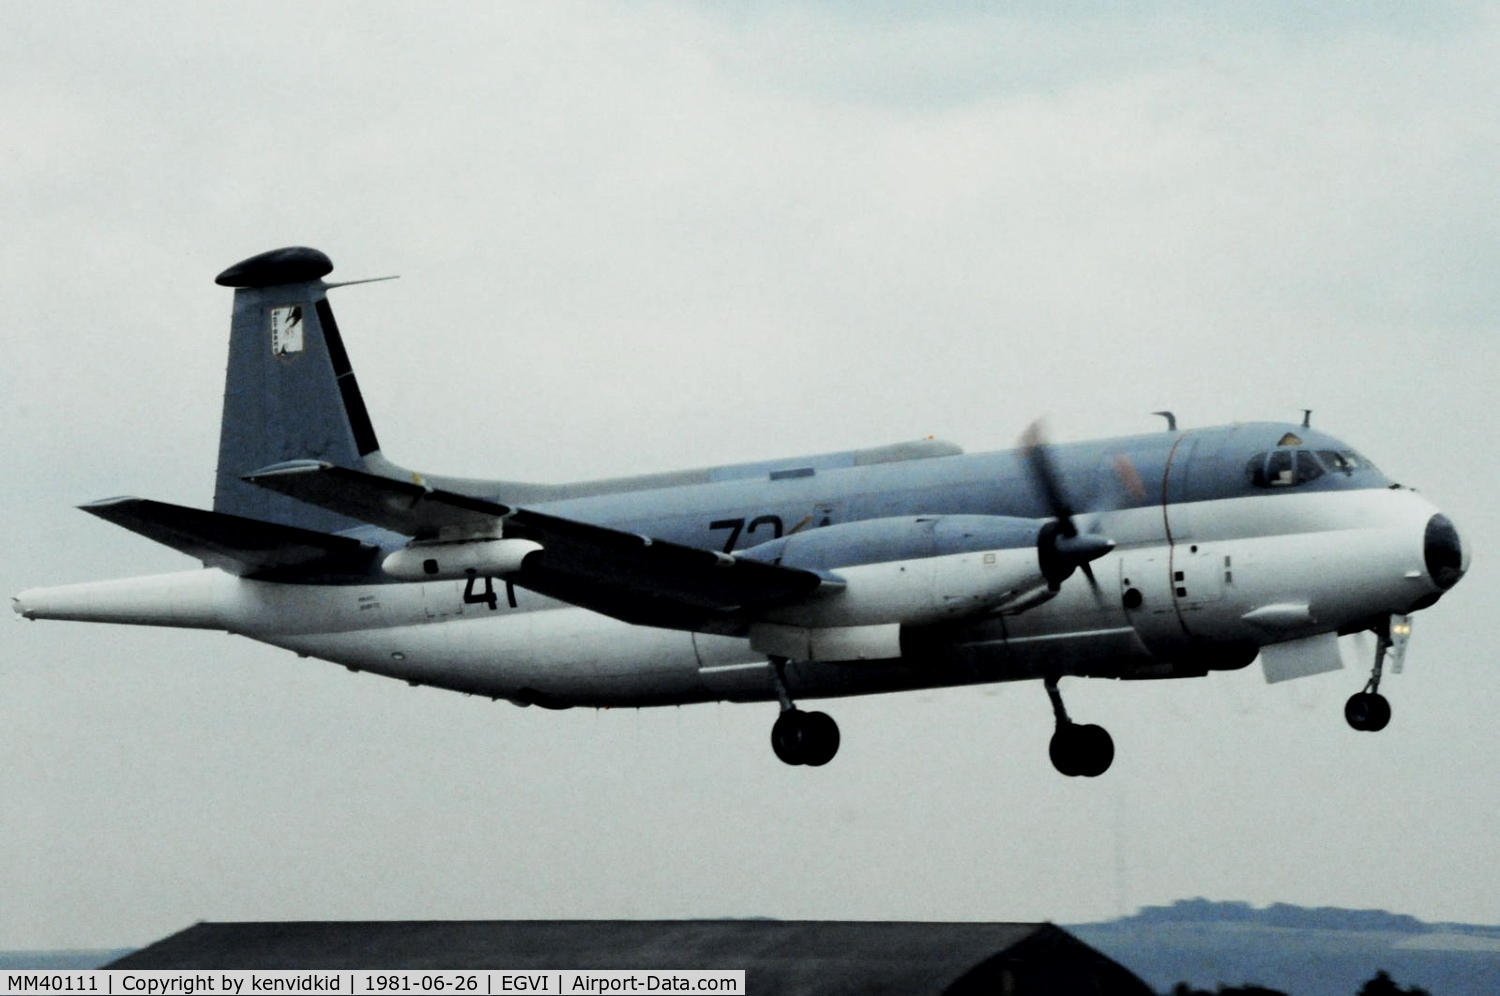 MM40111, Breguet 1150 Atlantic C/N 73, At the 1981 International Air Tattoo, scanned from slide.